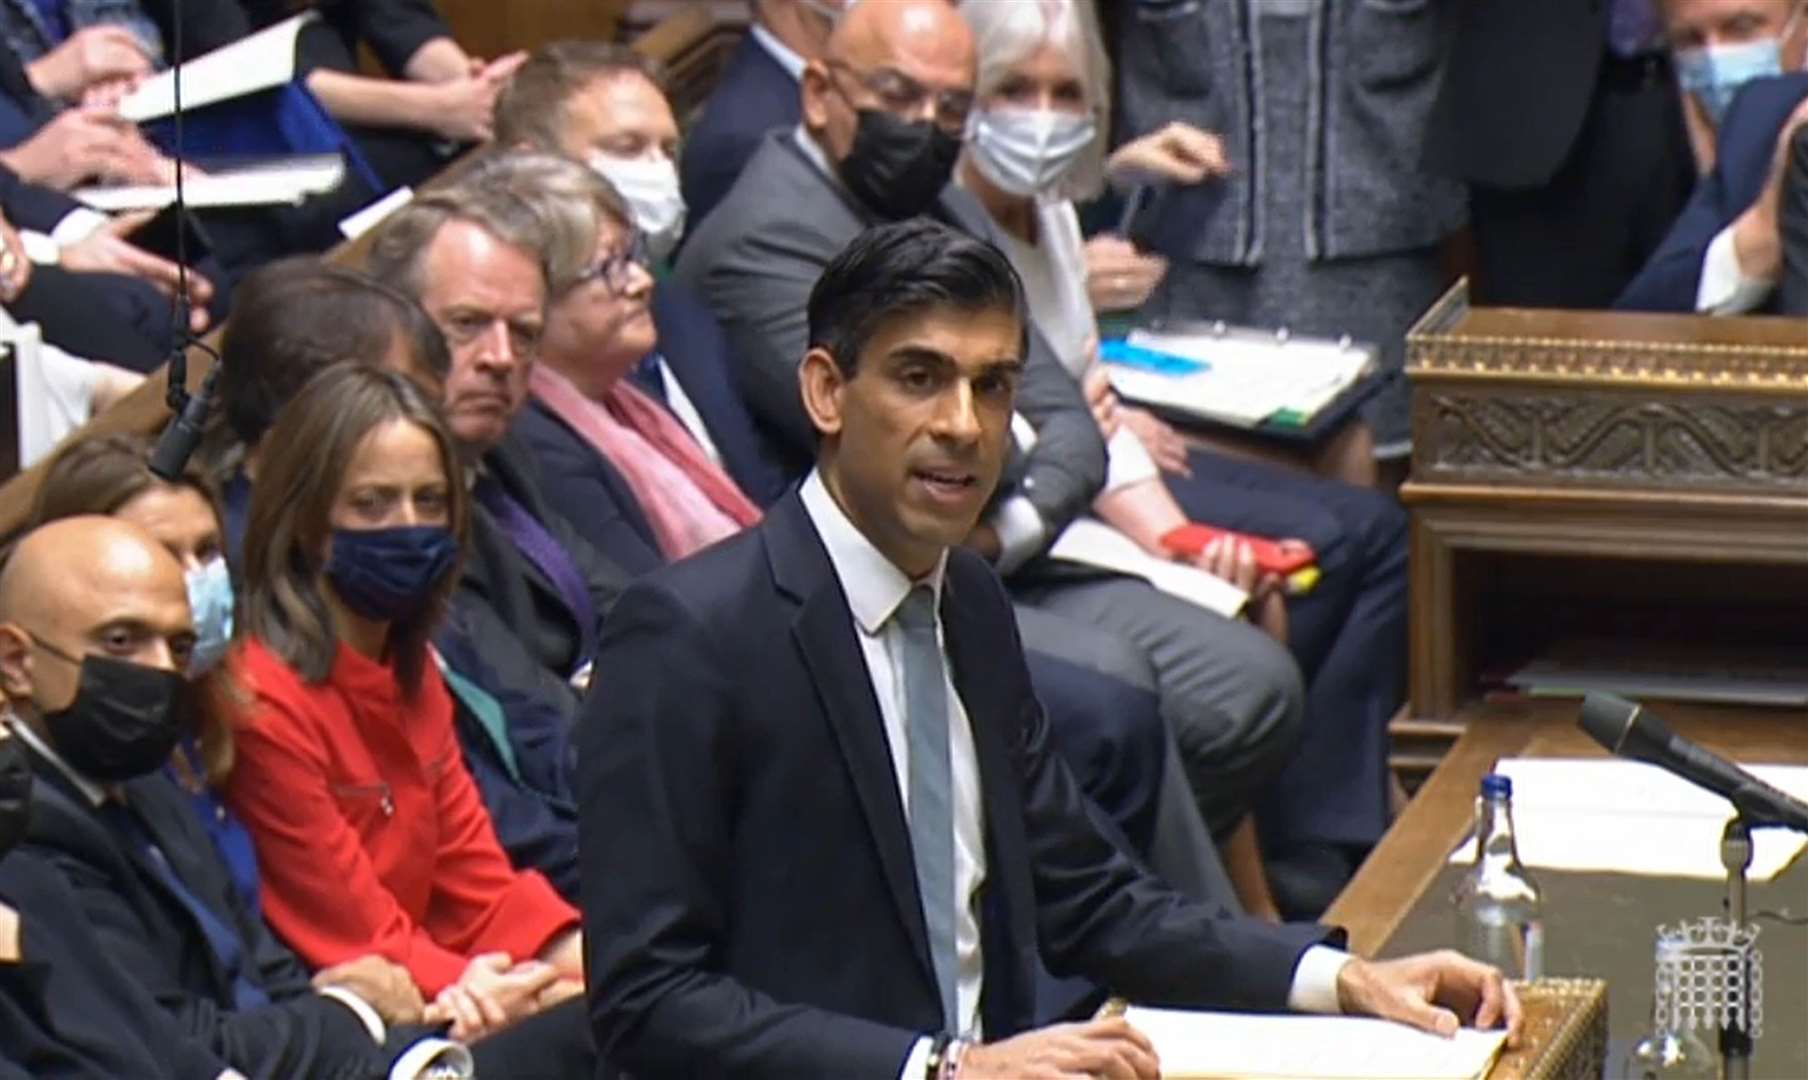 Chancellor of the Exchequer Rishi Sunak delivering his Budget to the House of Commons (House of Commons/PA)